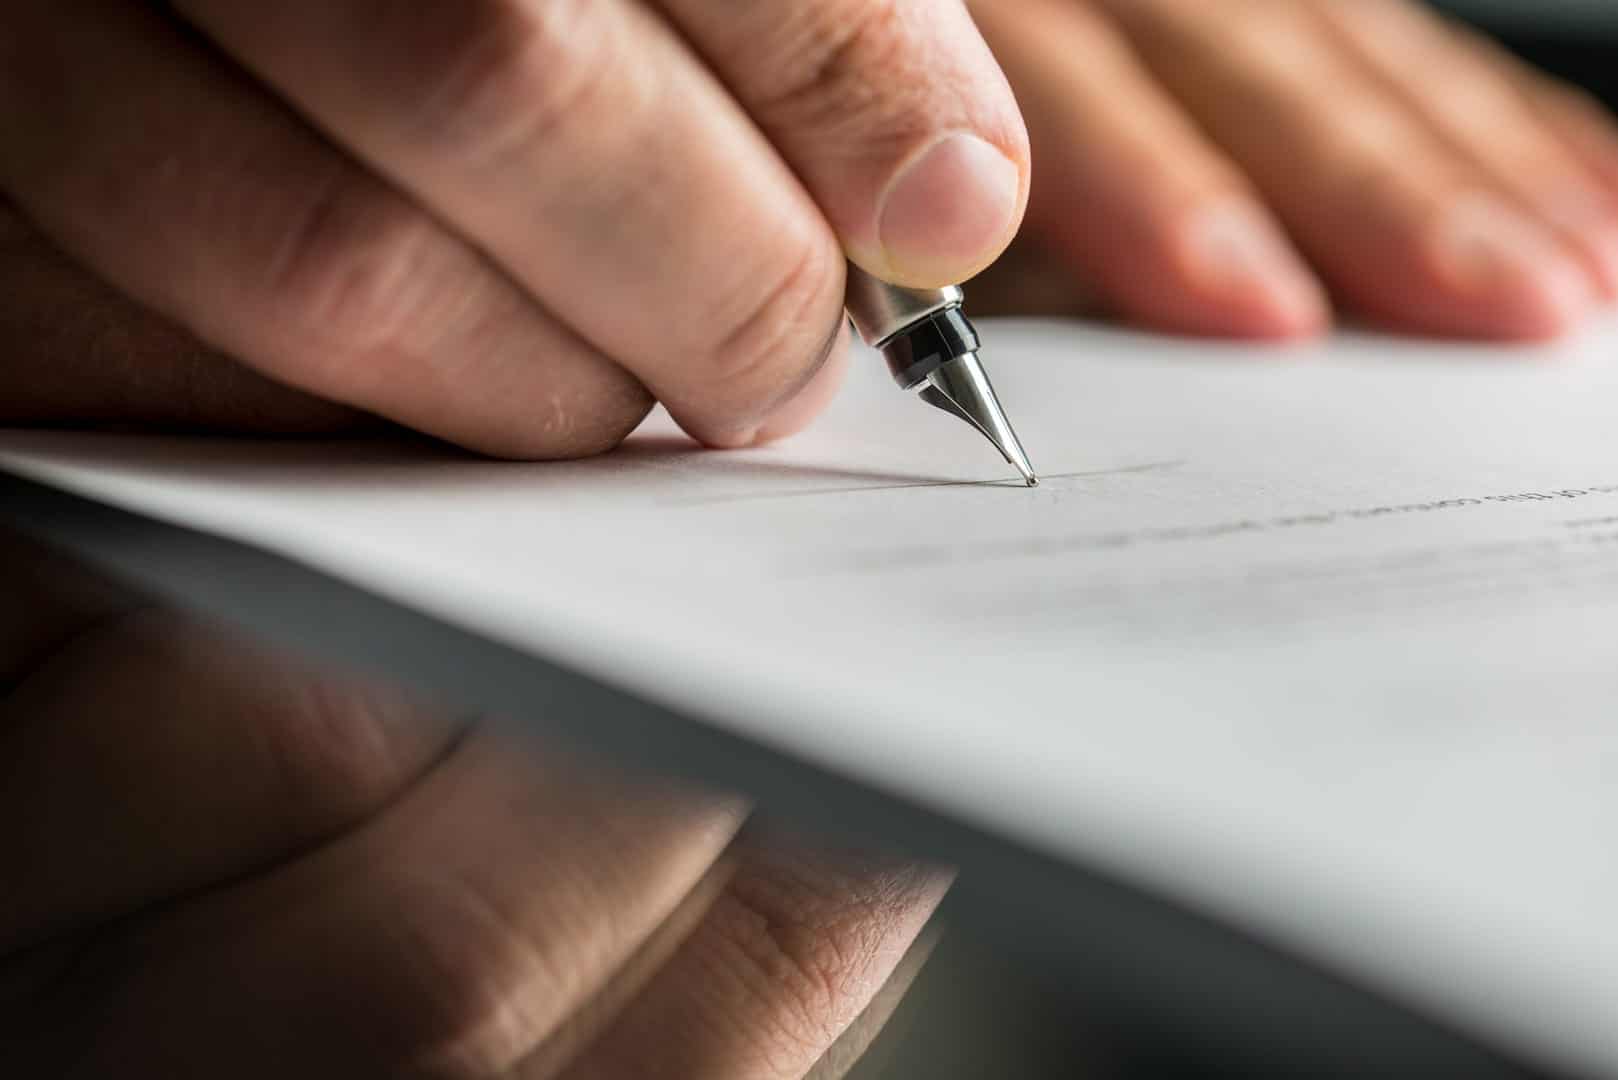 Fingers are holding a fountain pen, which is touching a piece of paper with printed text on it